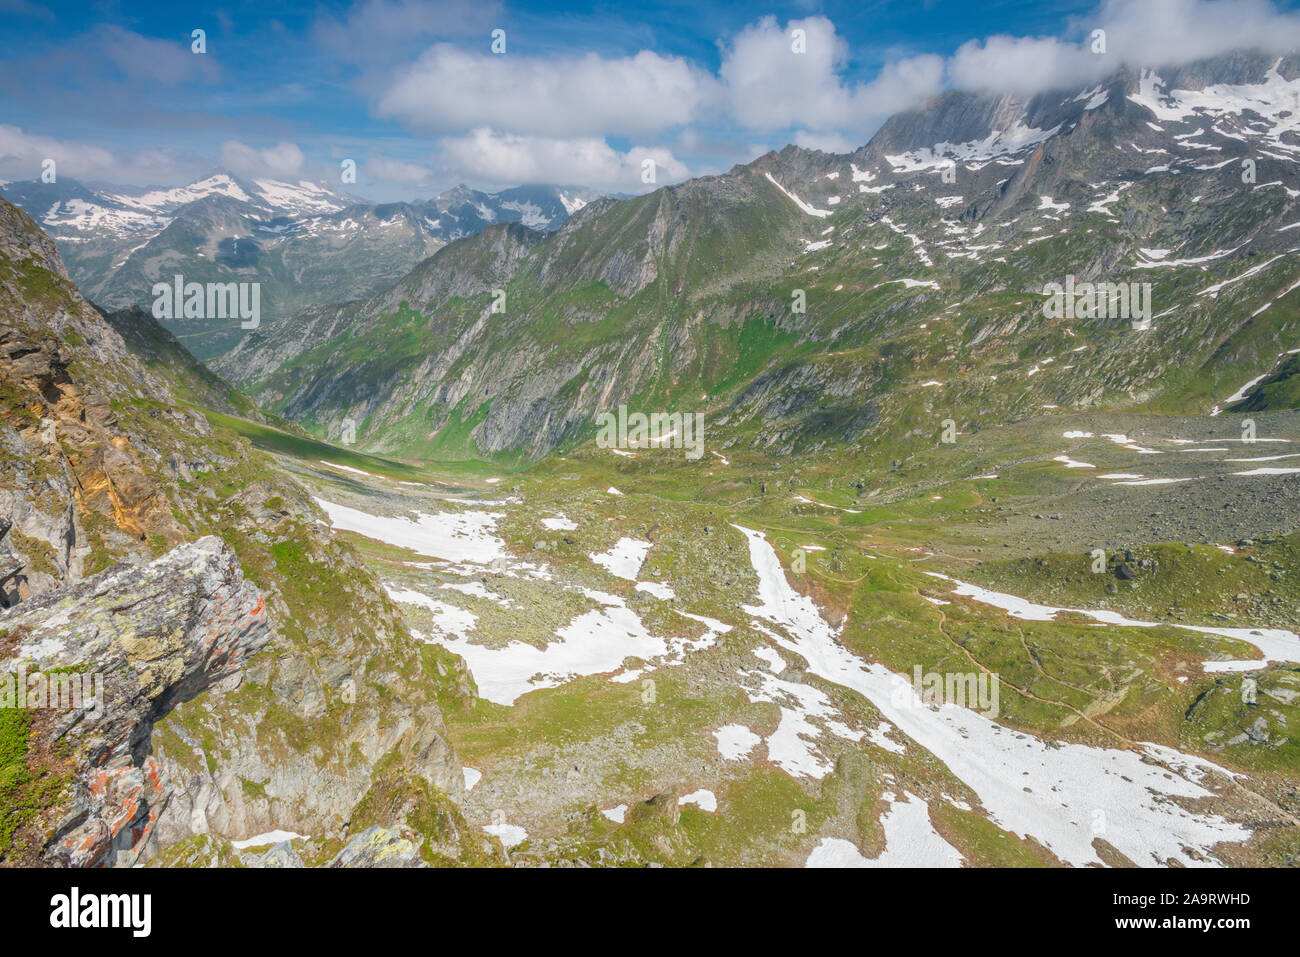 Snow patches on the slopes of the Alps between the Italian and Austrian border. Lingering snow on the mountains, zig-zagging trail dropping below. Stock Photo